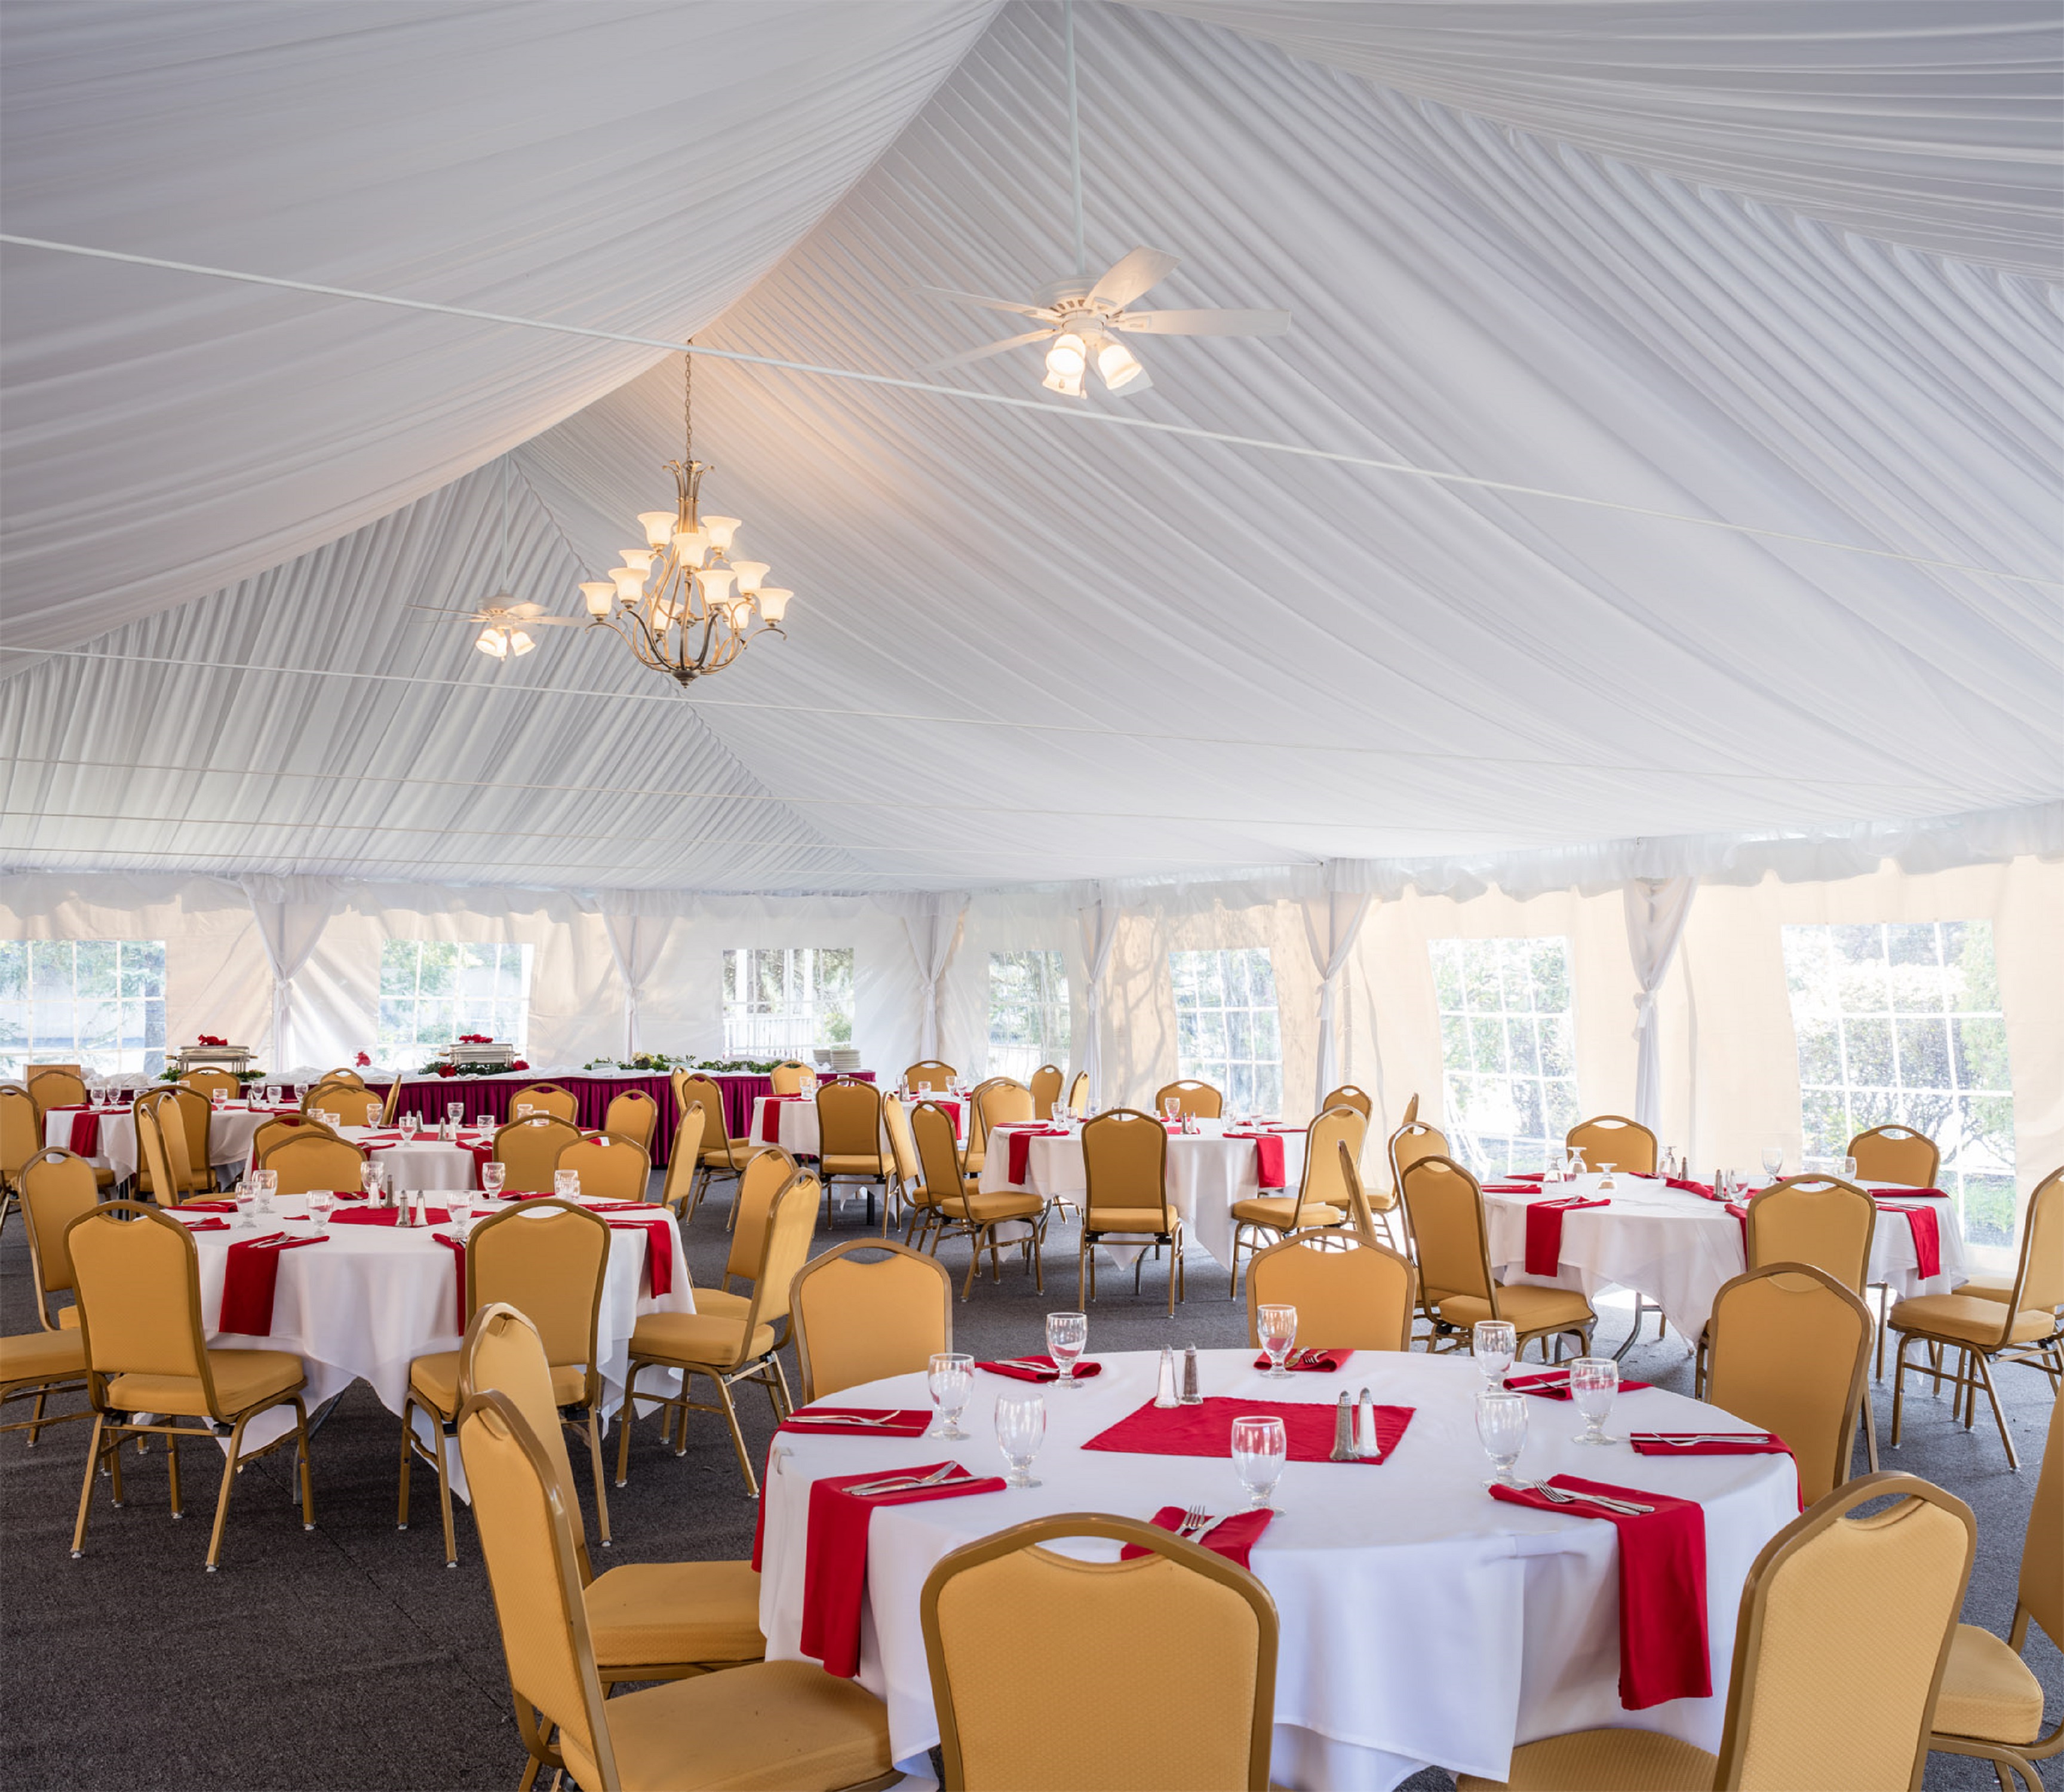 Drinking Glasses, Silverware, Red Napkins, and White Linens on Banquet Tables and Food Service Area Set Up for Event Under White Pavilion Tent